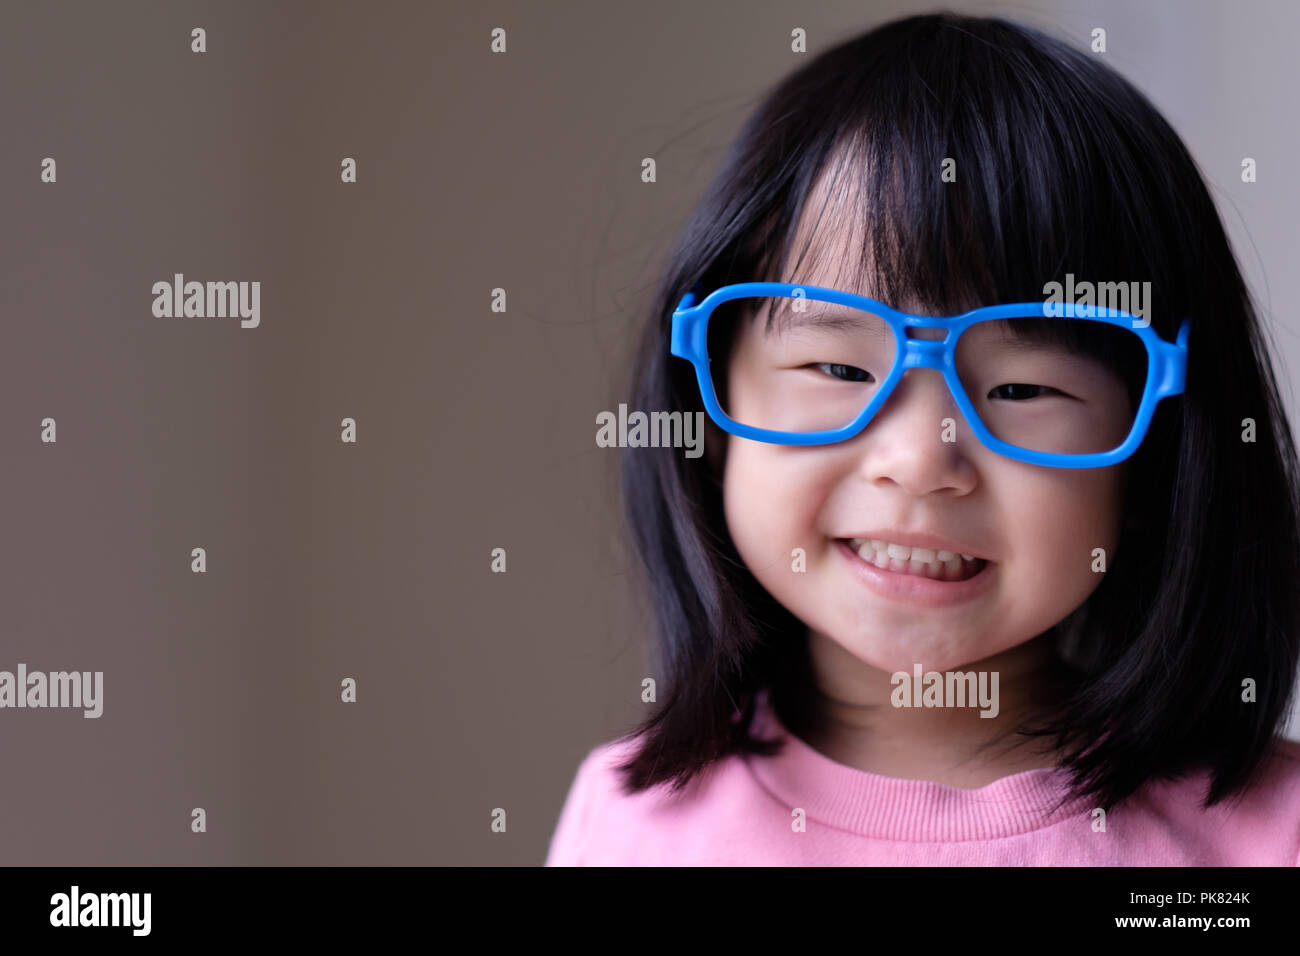 Funny little child with big blue glasses Stock Photo